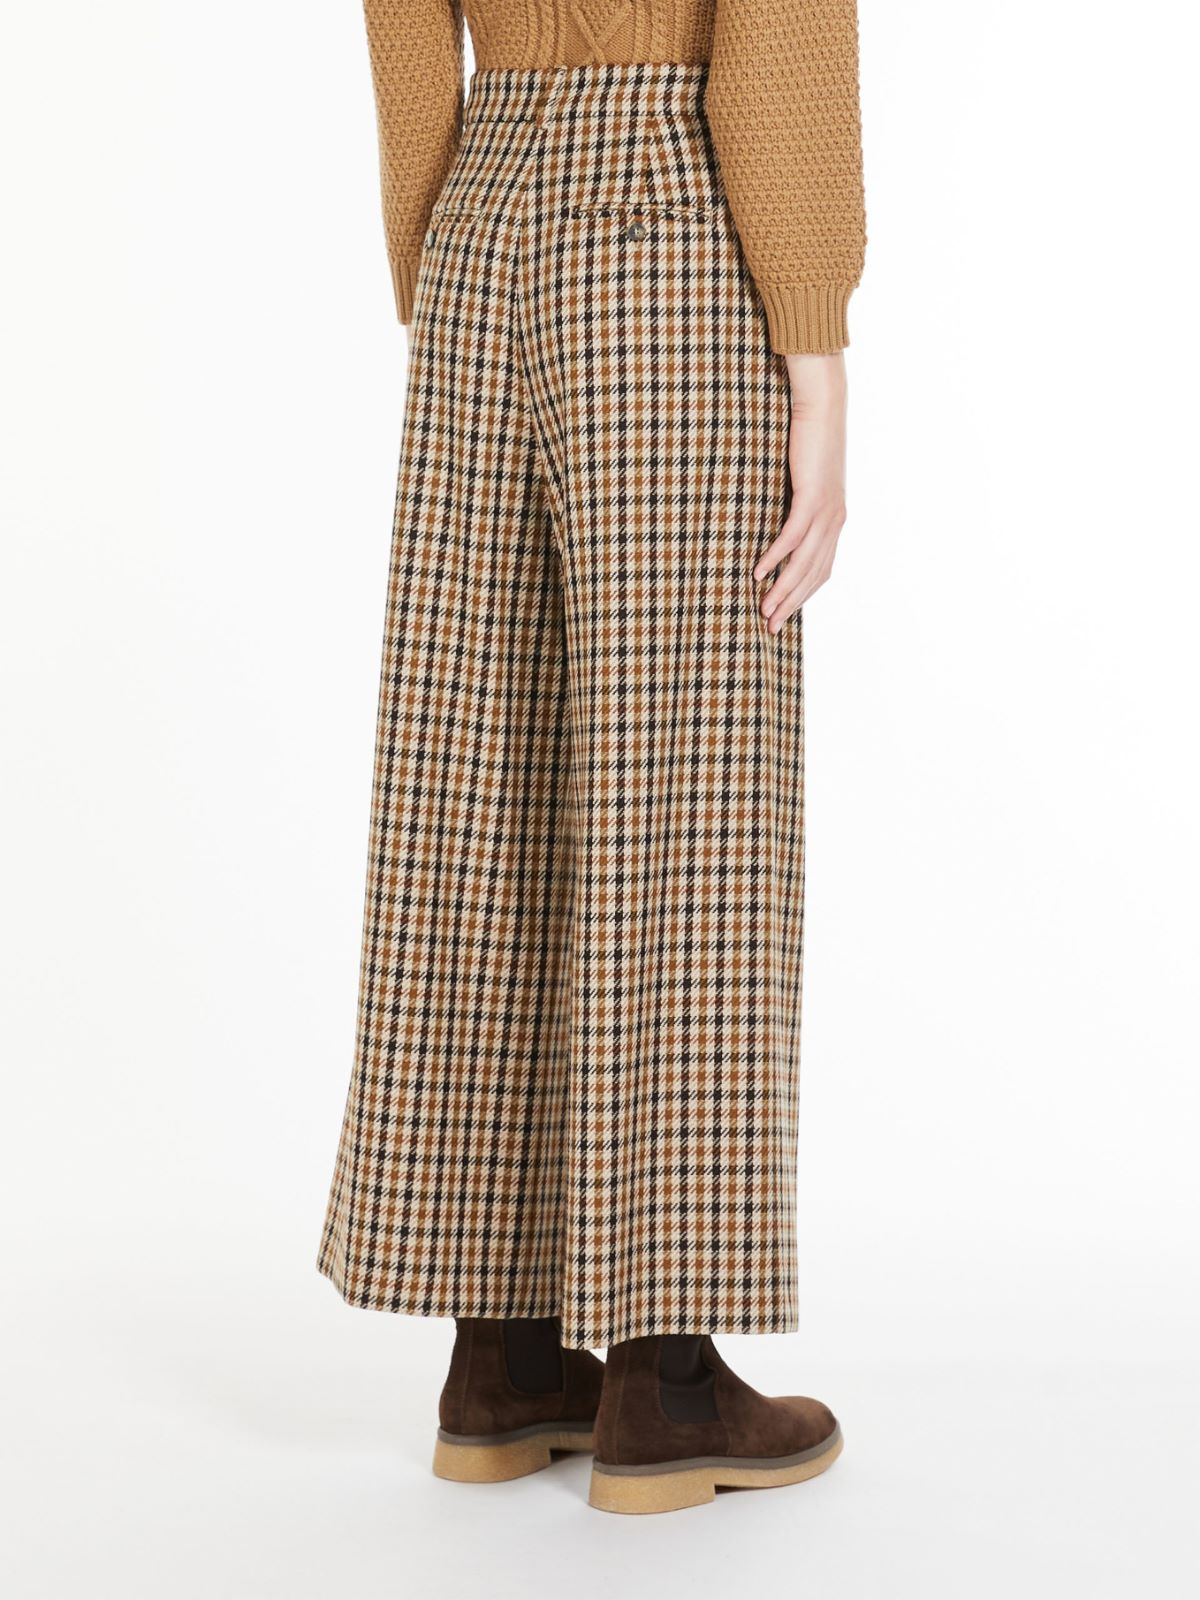 Wool and cotton trousers - BROWN - Weekend Max Mara - 3